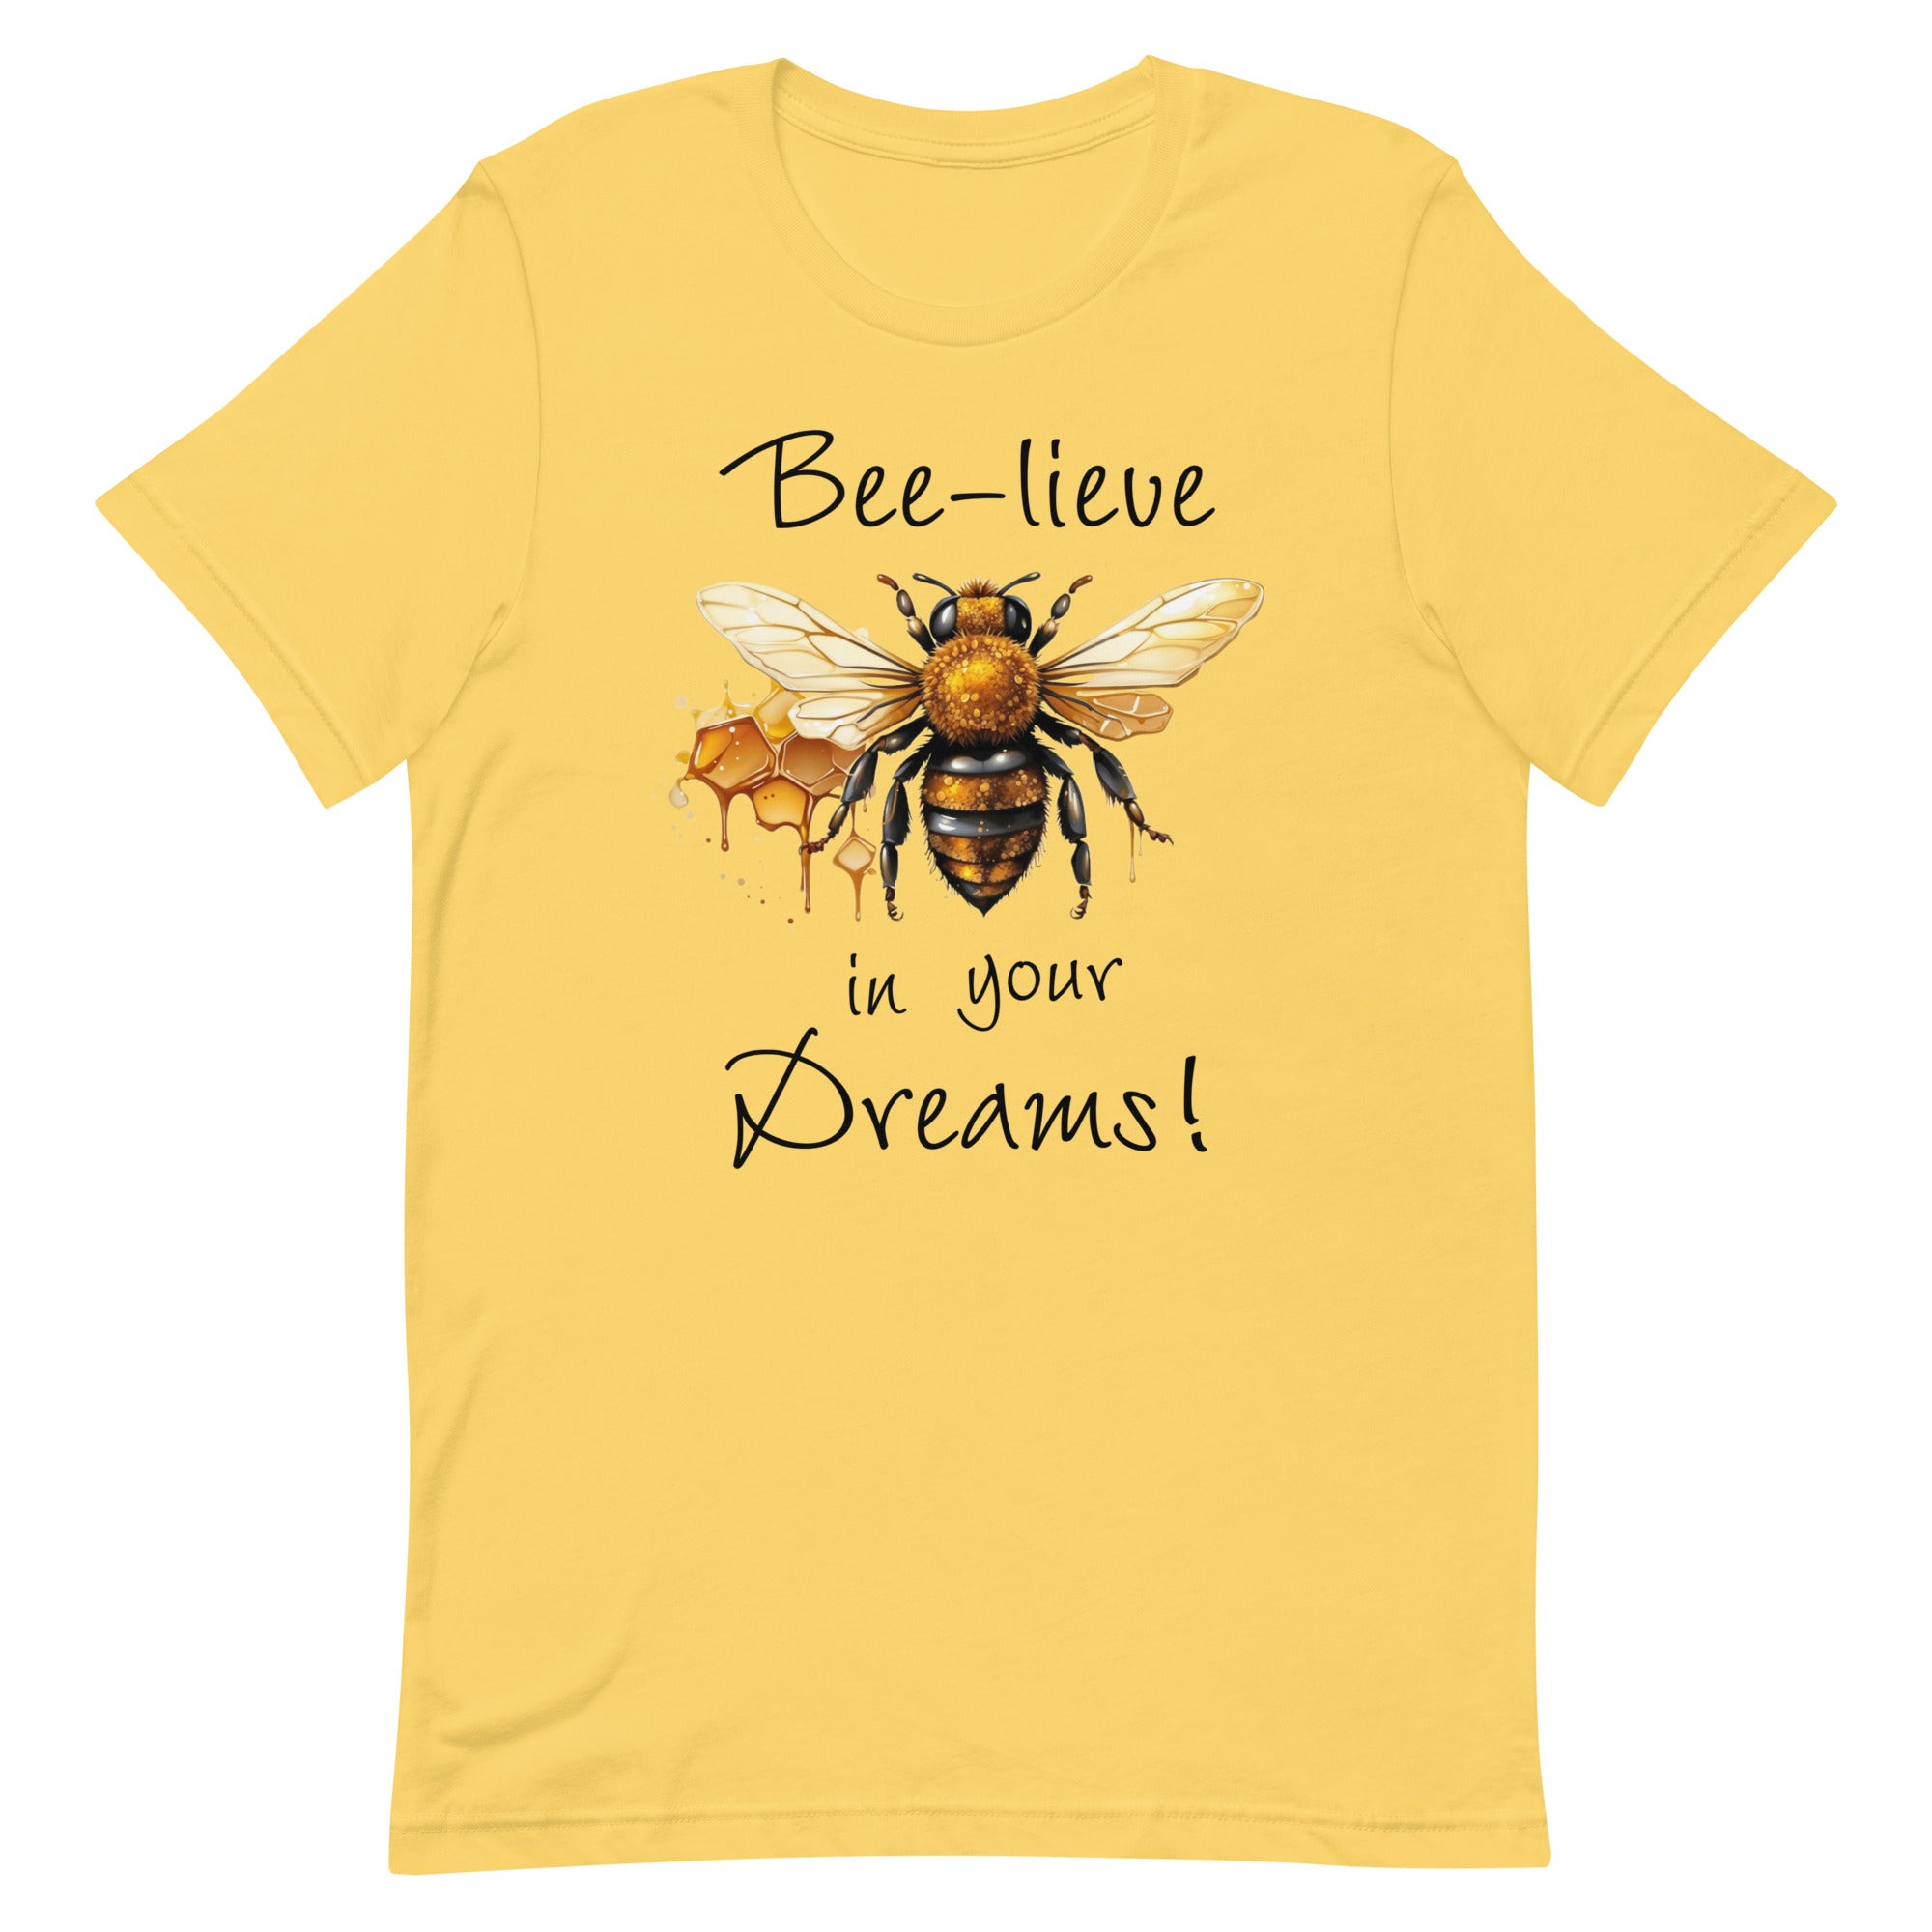 Bee-lieve in Your Dreams T-Shirt, Gift for Bee Lovers Yellow L S XL M DenBox